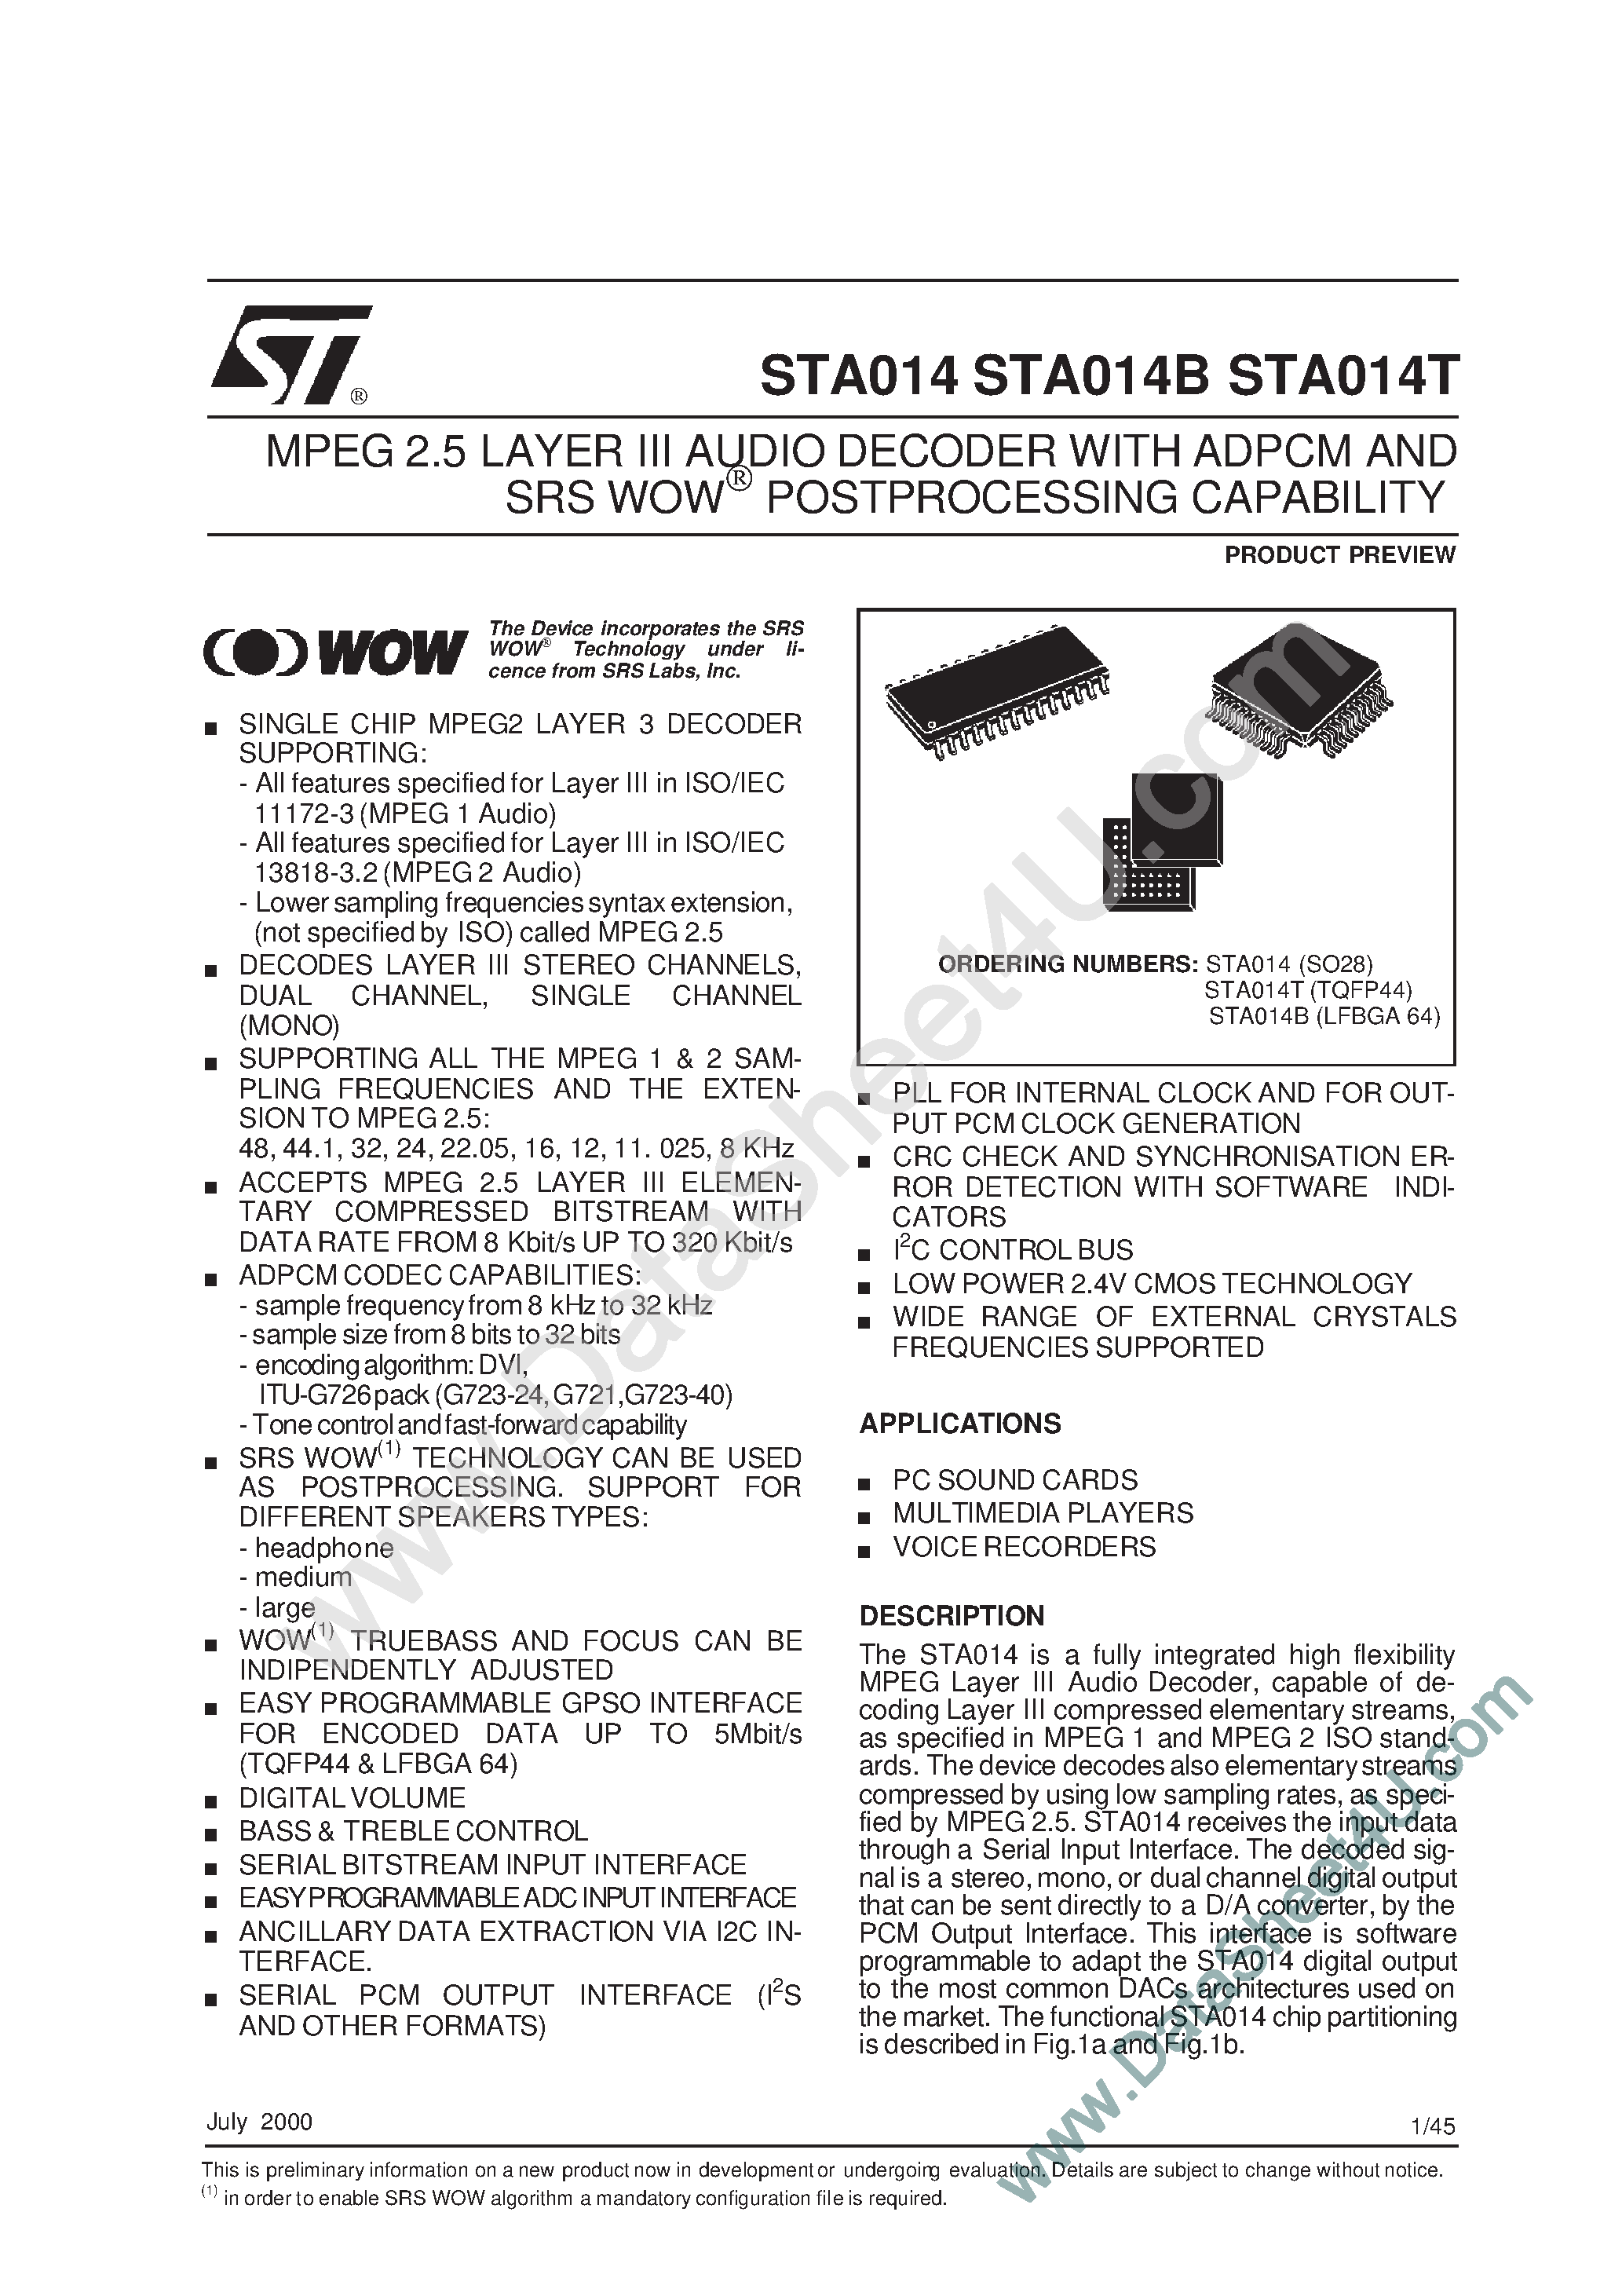 Datasheet STA014 - (STA014x) MPEG 2.5 LAYER III AUDIO DECODER WITH ADPCM AND SRS WOWO POSTPROCESSING CAPABILITY page 1